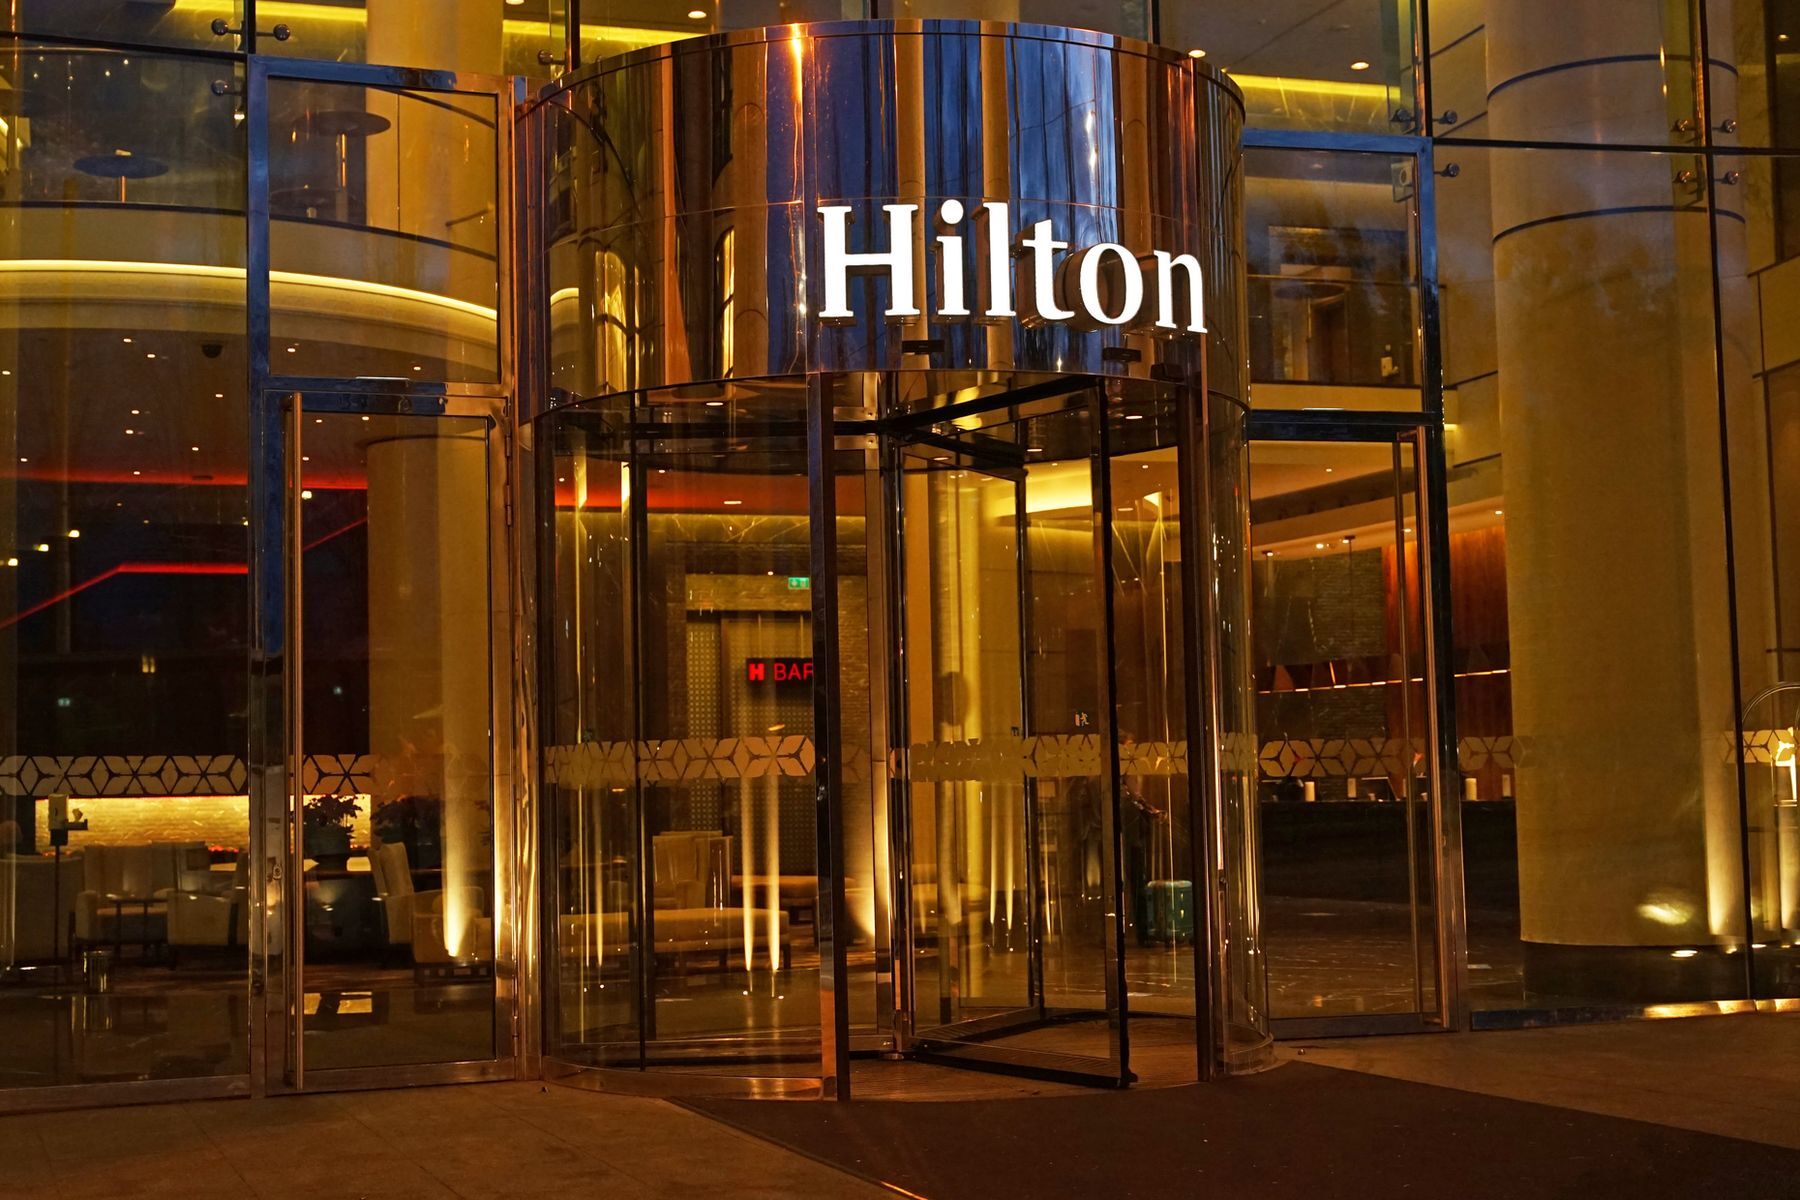 <p>Founded over 100 years ago, Hilton was already one of America’s most recognized hotel brands, and skyrocketed to even greater name recognition in the late ‘90s and early 2000s due to the rise in notoriety of Paris Hilton, the <a href="https://www.tatler.com/gallery/hilton-family-dynasty">great-granddaughter</a> of founder Conrad Hilton. Starting with one hotel in Texas in the 1920s, the brand now has <a href="https://www.hilton.com/en/corporate/#:~:text=With%20more%20than%20584%20hotels,with%20the%20word%20%E2%80%9Chotel.%E2%80%9D" rel="noreferrer noopener">over 7,500 properties in 126 different countries and territories</a>, leading it to be deemed by many as the world’s most famous hotel brand.</p>